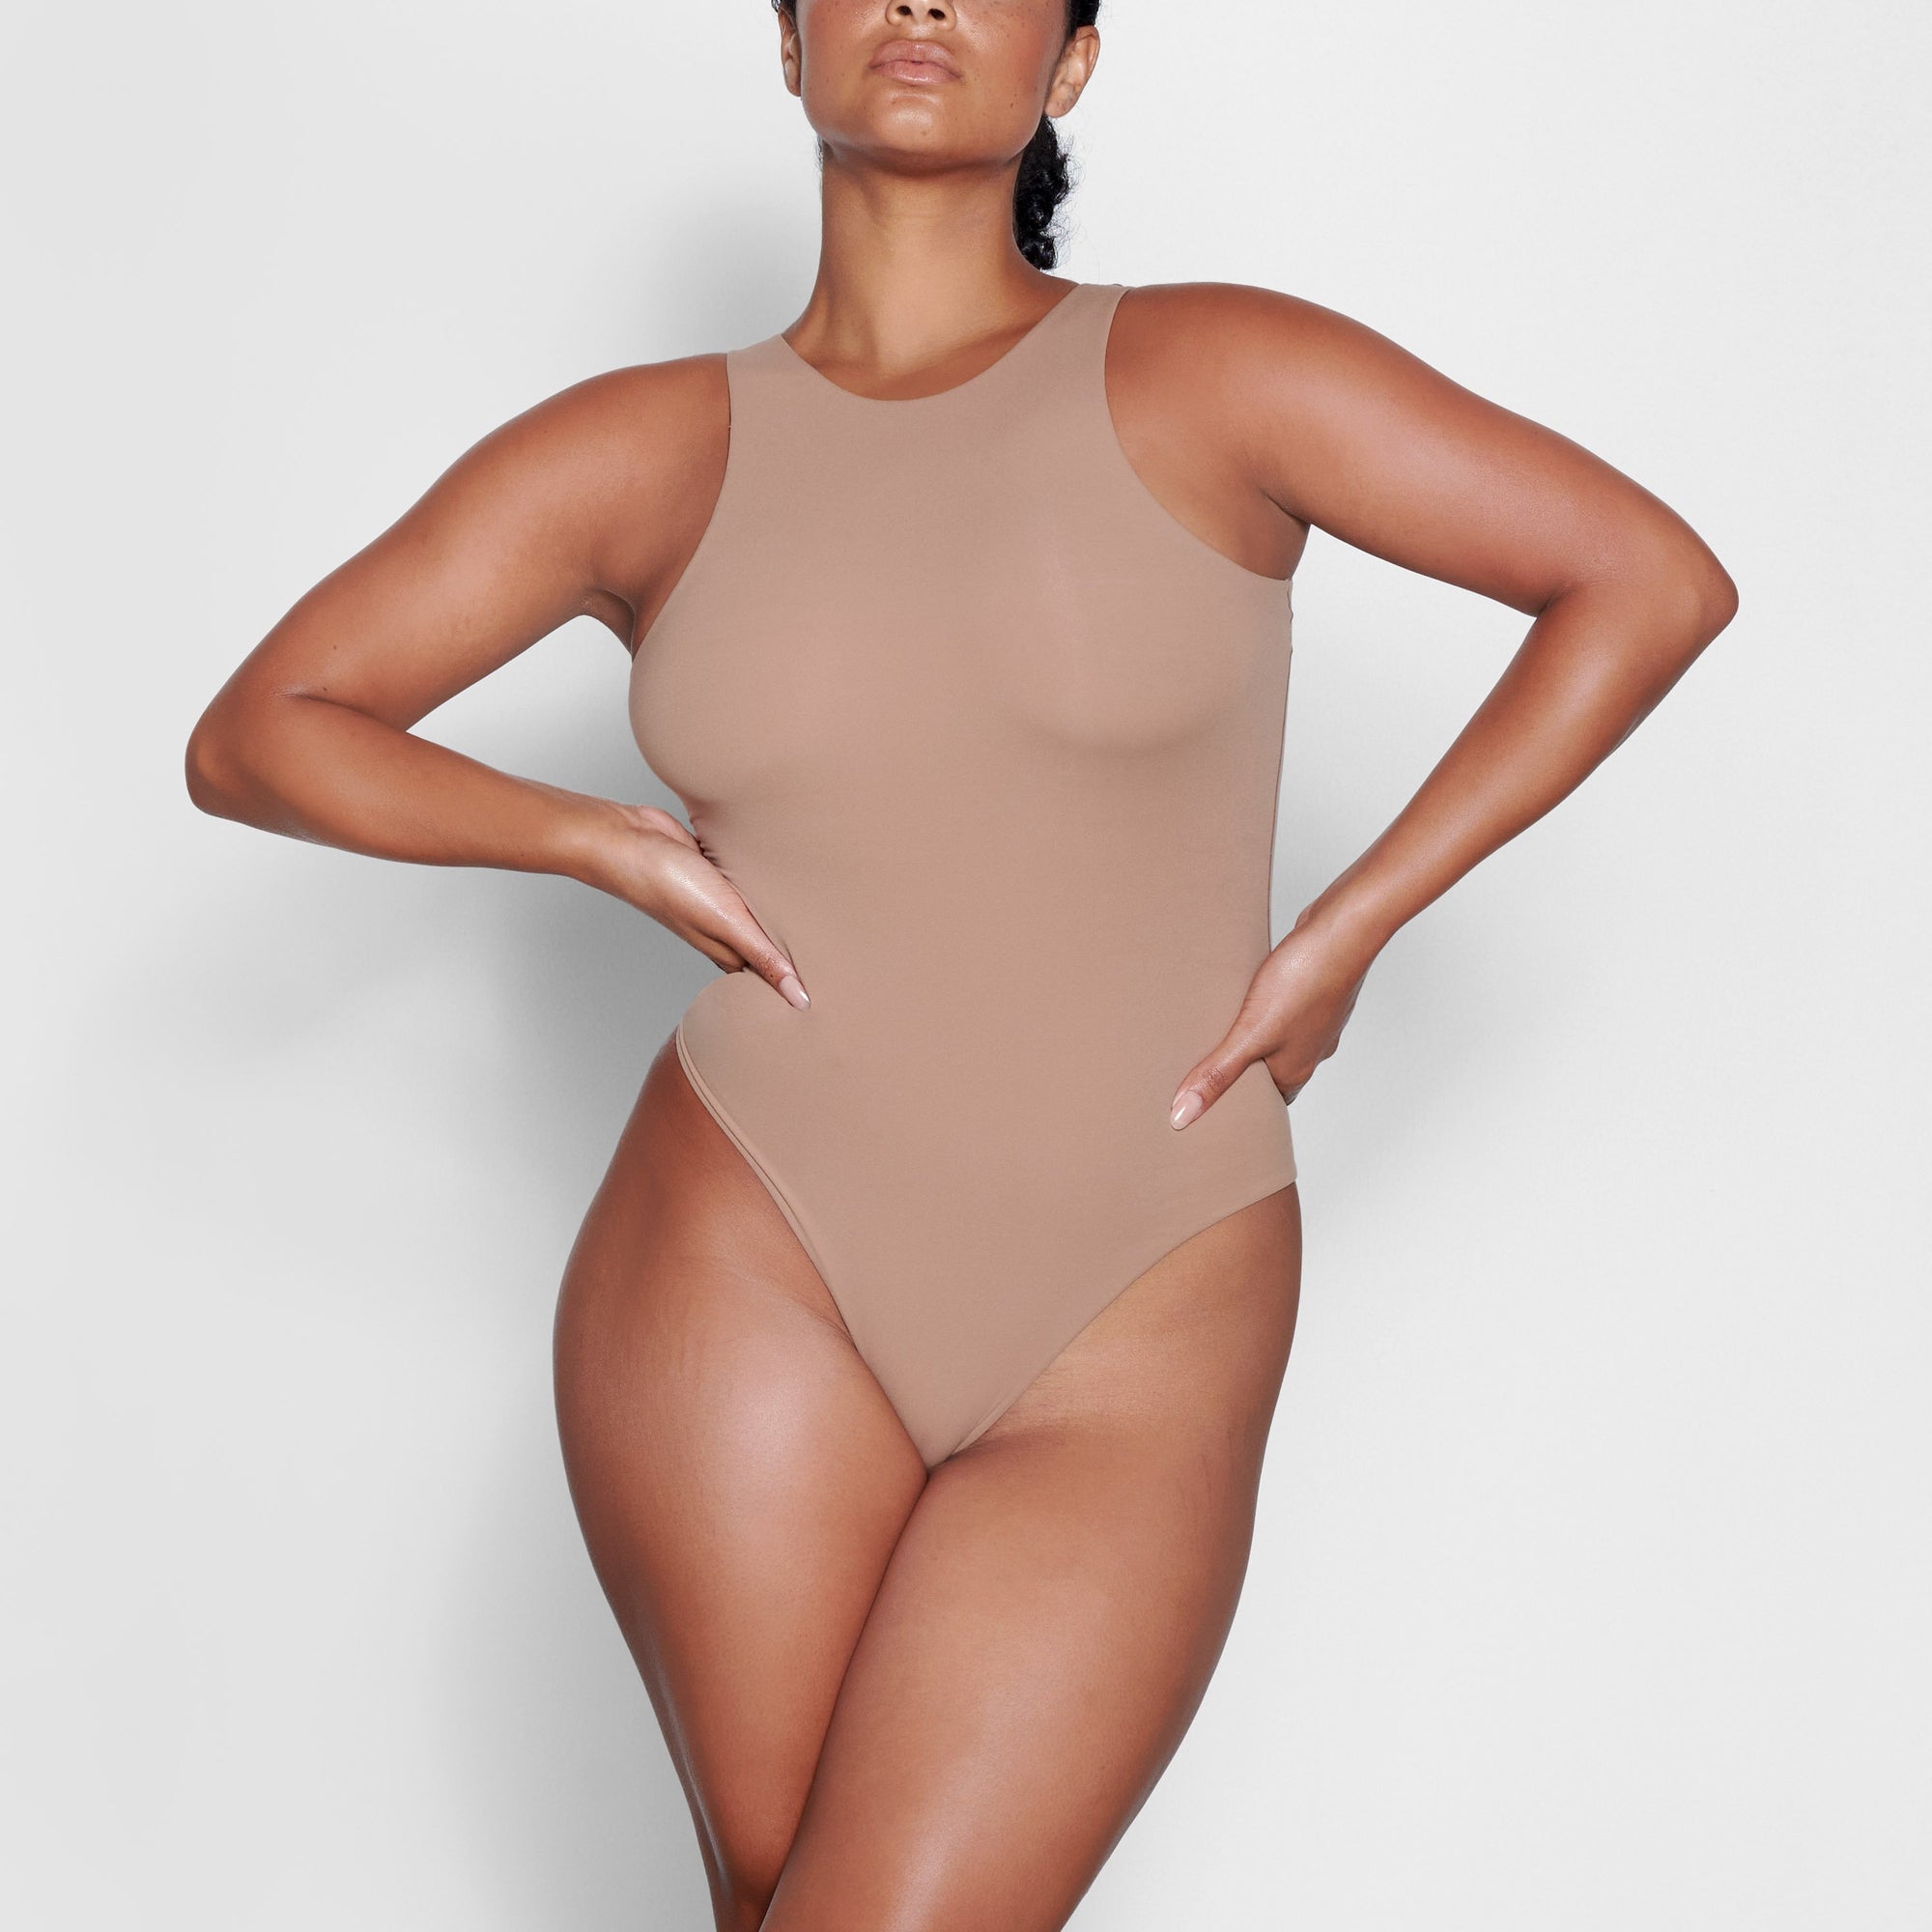 SKIMS FITS EVERYBODY HIGH NECK BODYSUIT in Sienna shapewear size 4X - $41 -  From Cindy